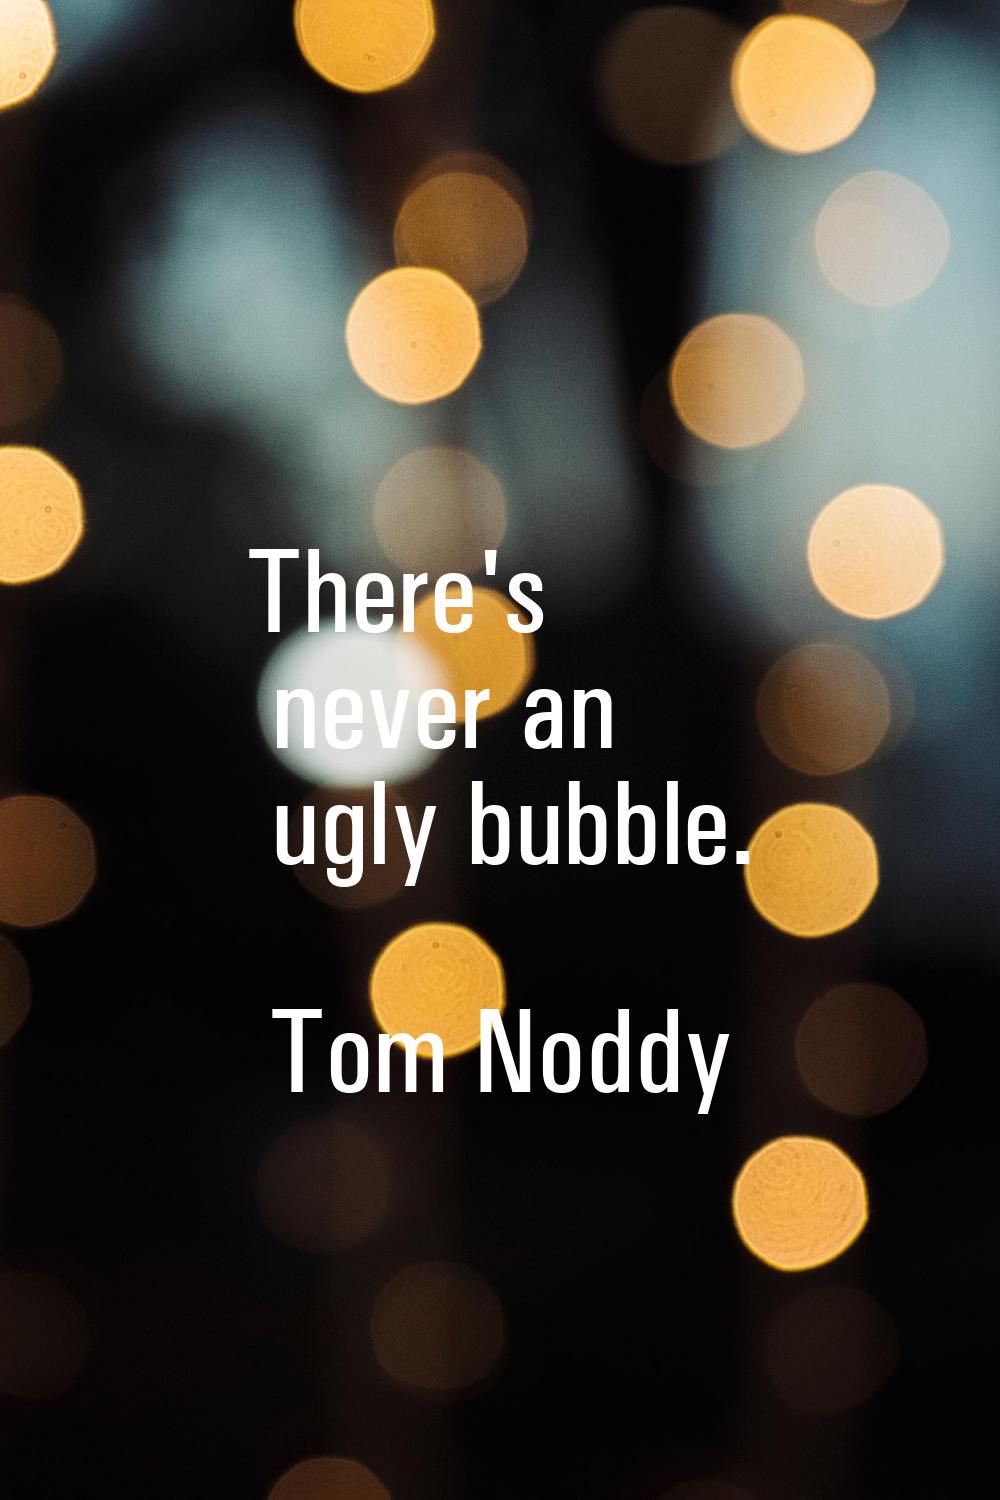 There's never an ugly bubble.